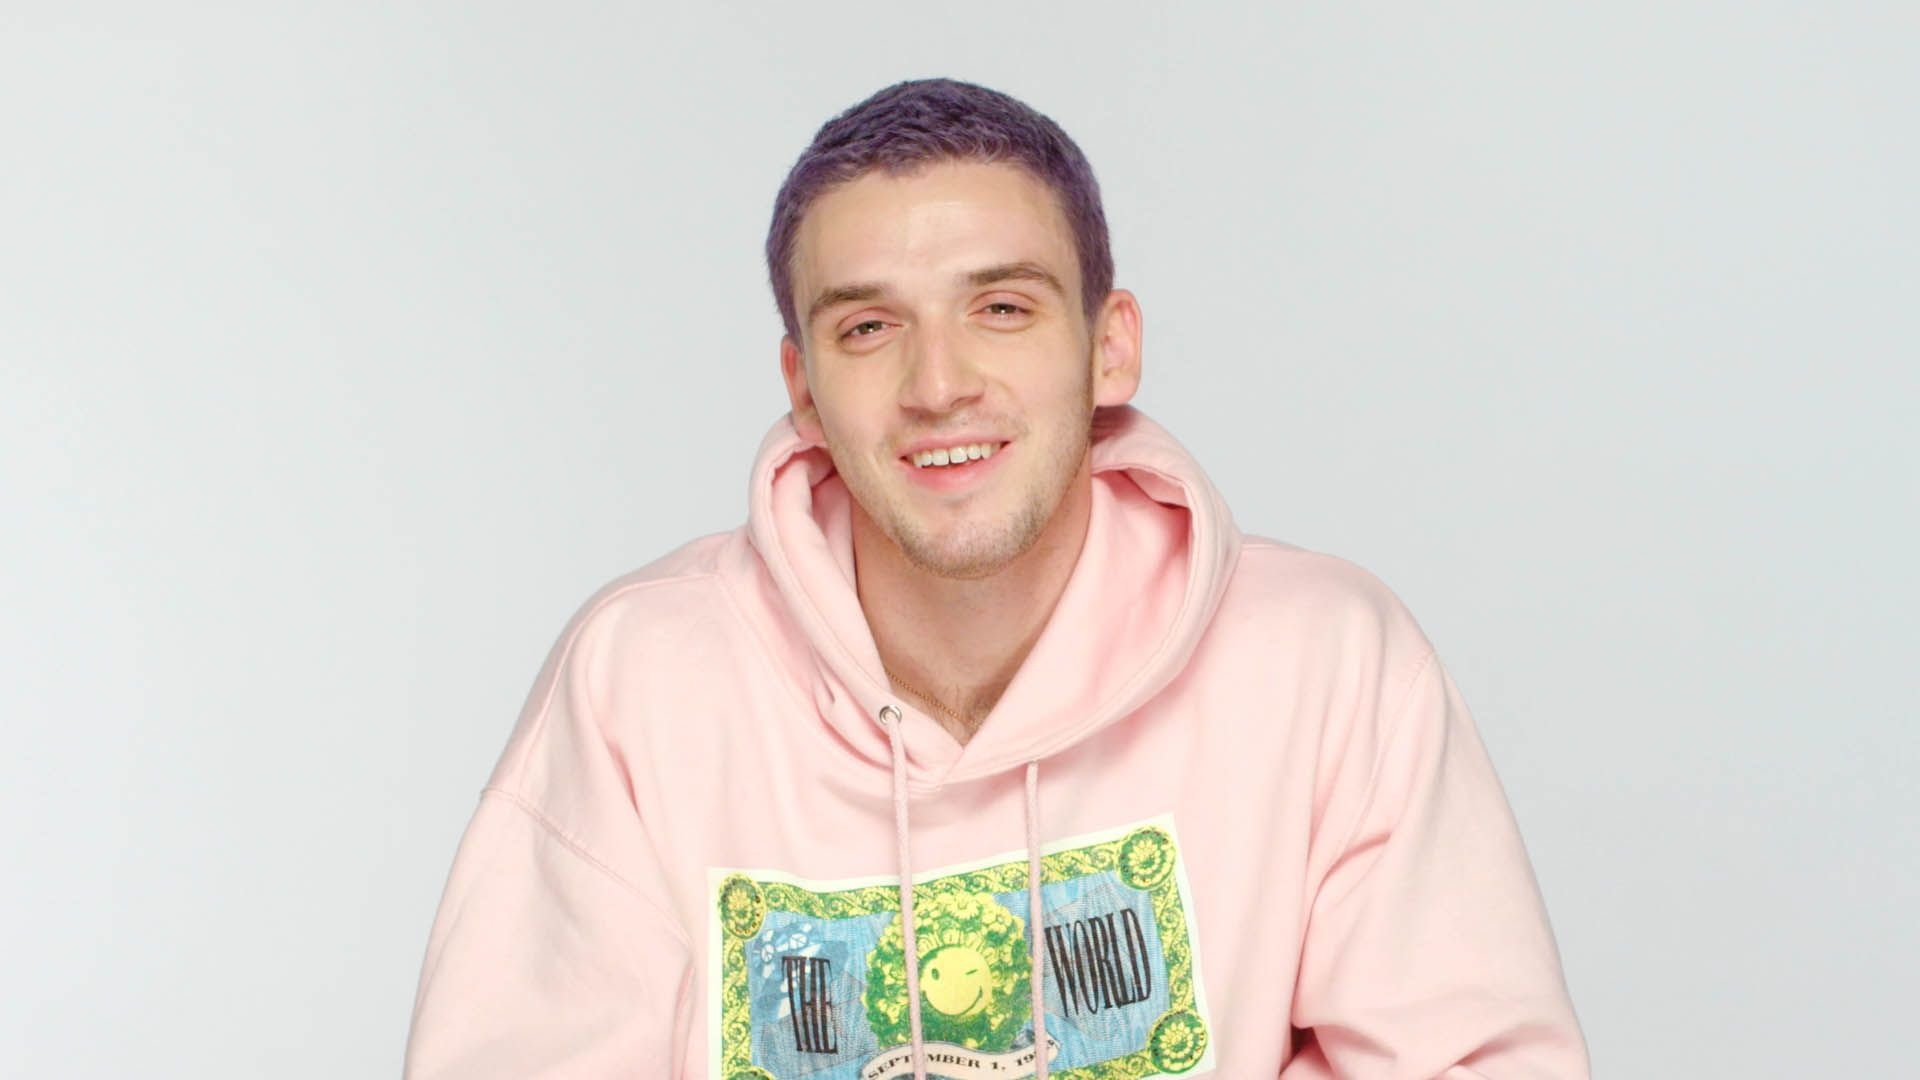 Watch Lauv Get Quizzed on Trivia from the Year 1994 1920x1080